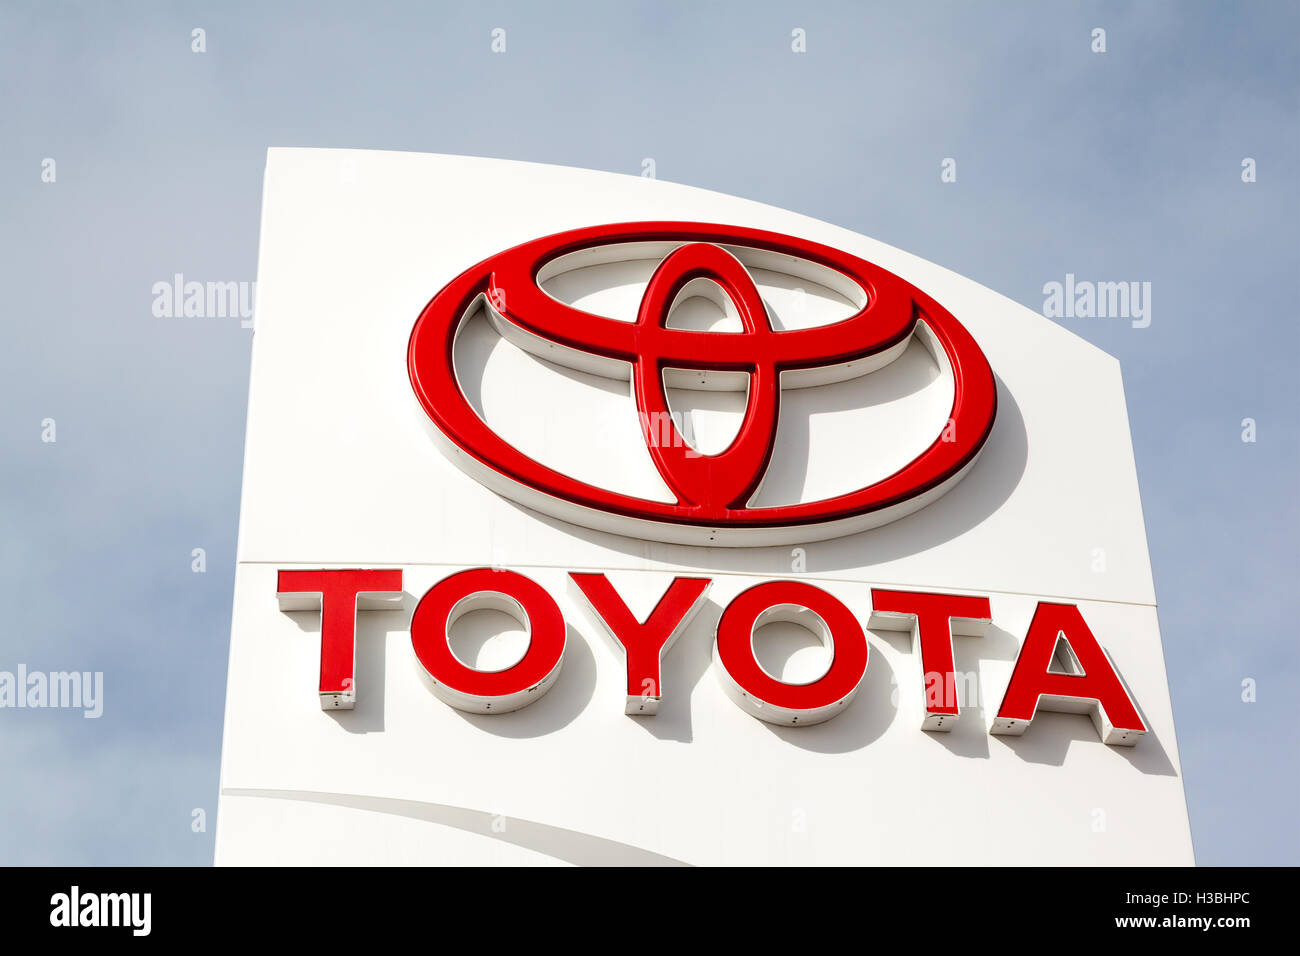 Calgary, Alberta, Canada - March 19, 2014: A Toyota Motor Corporation sign at a car dealership. Toyota reached a $1.2 billion se Stock Photo